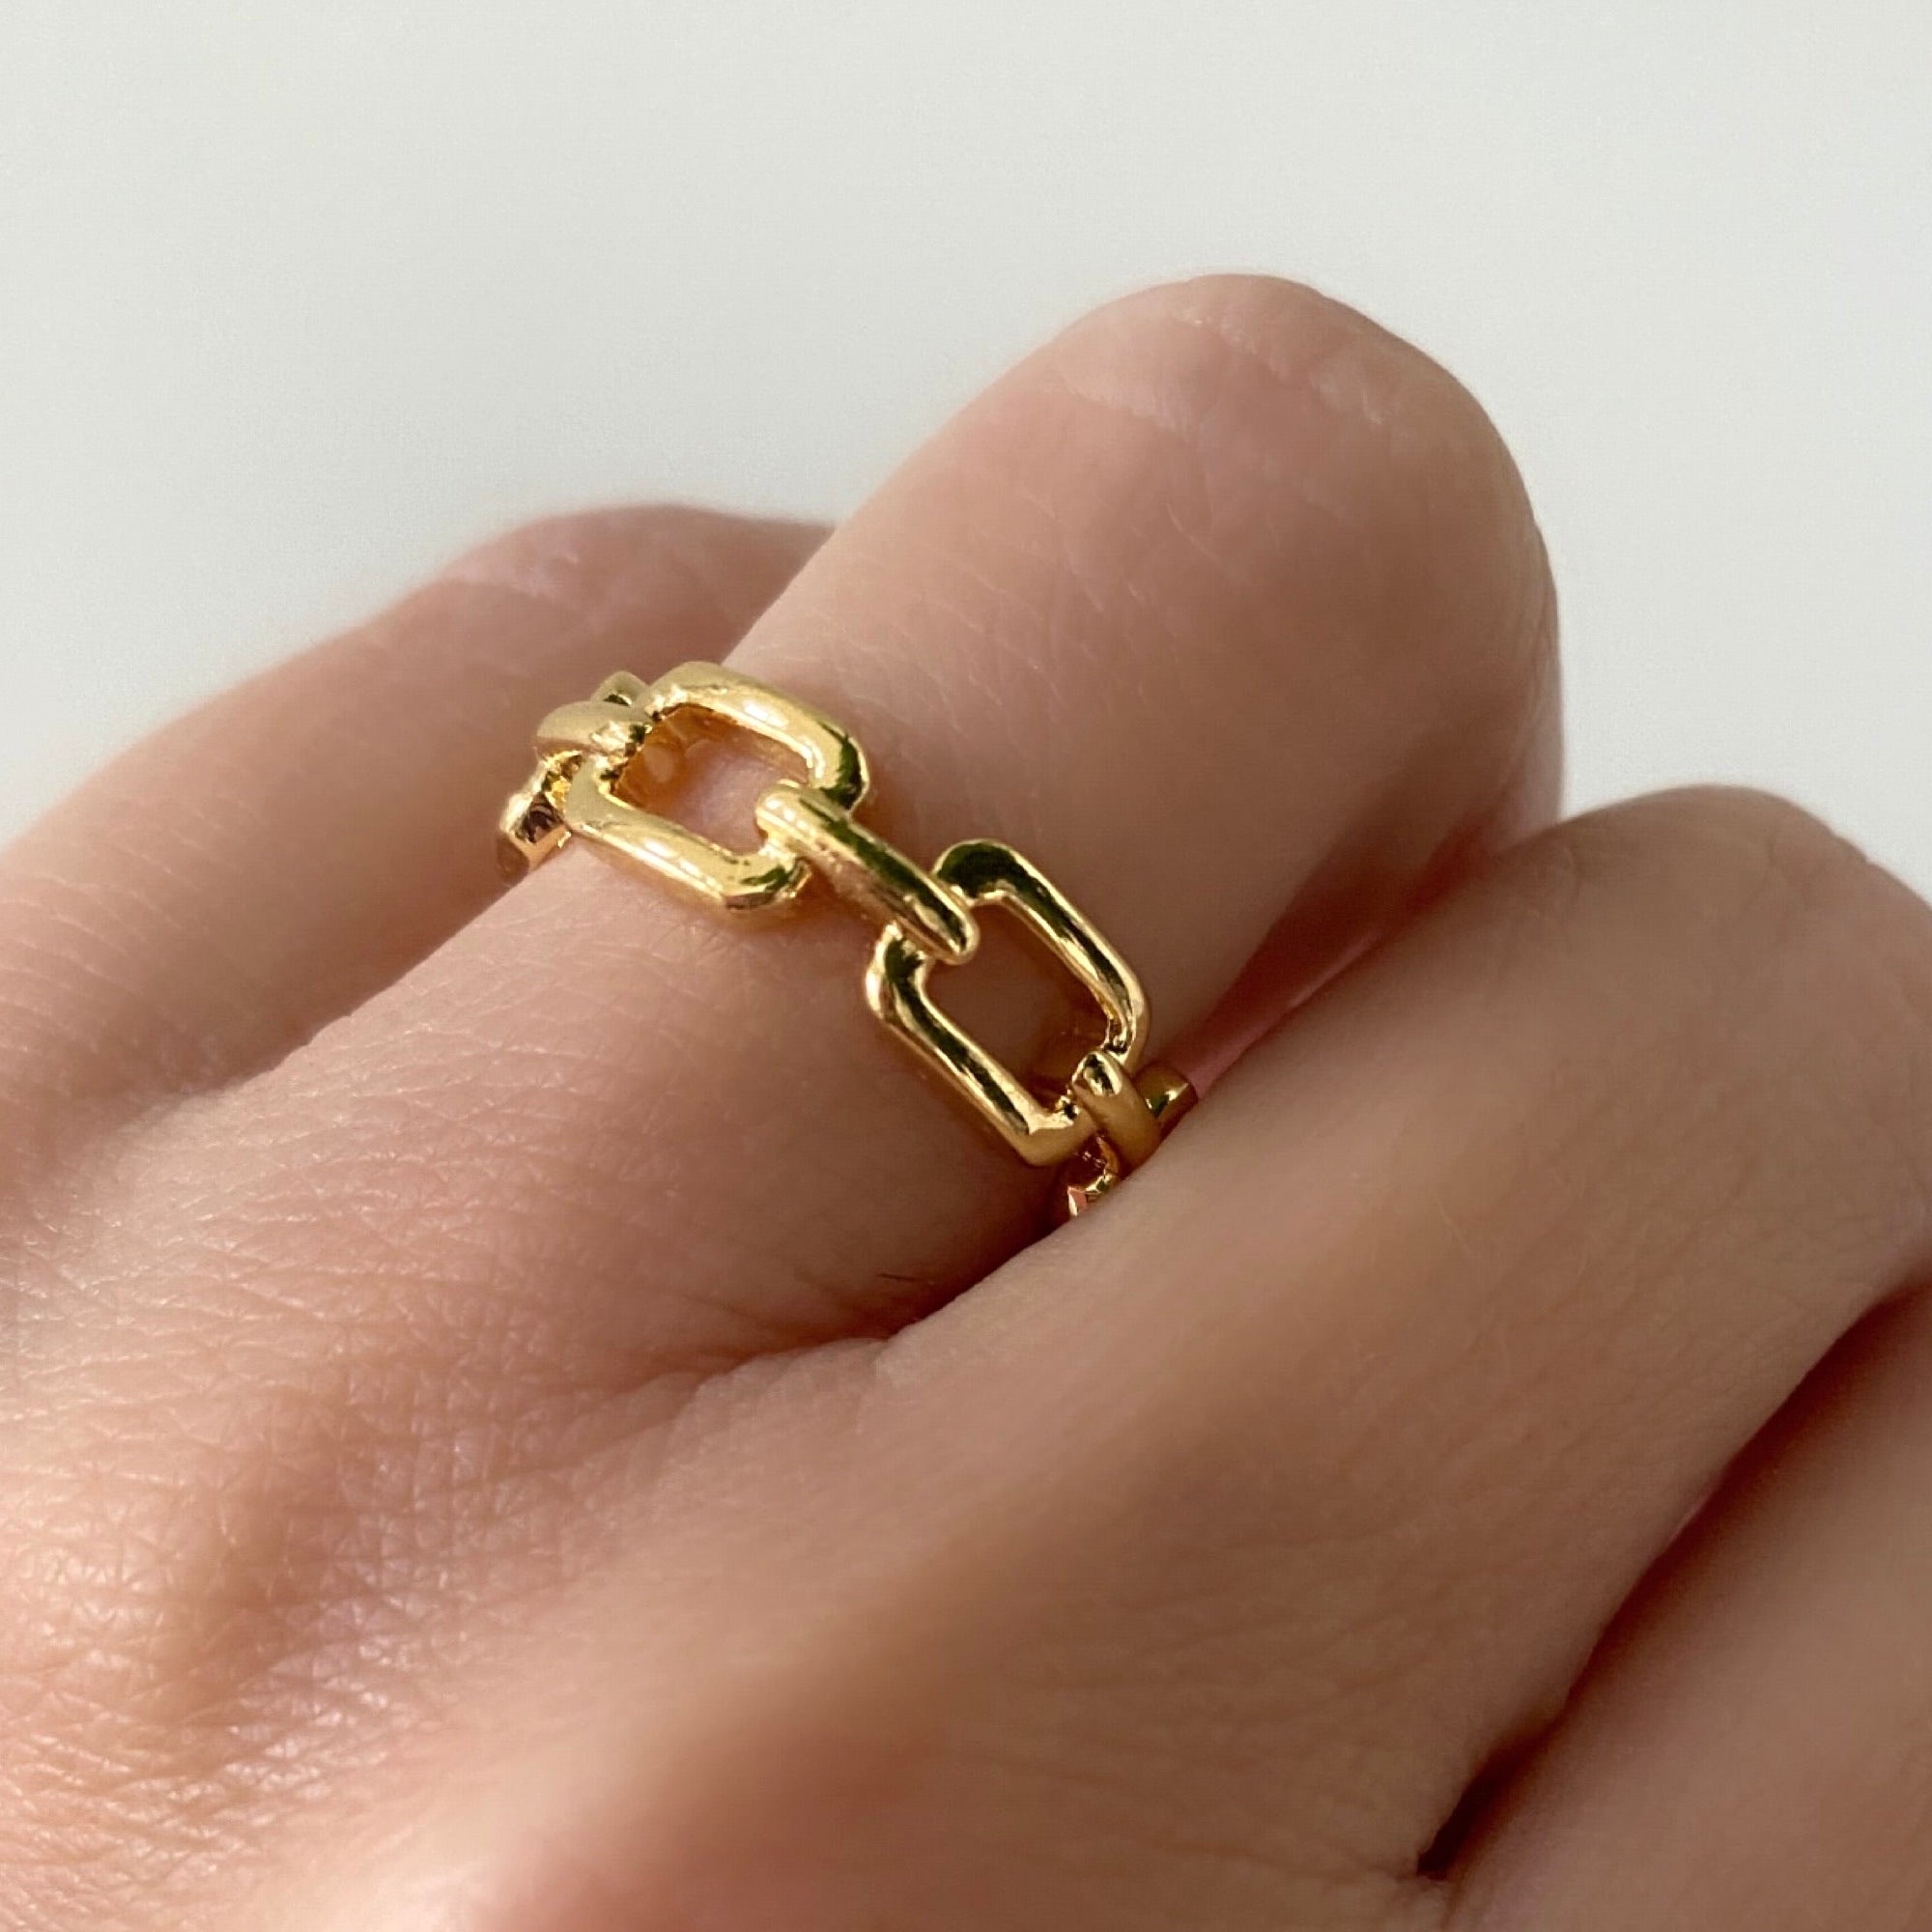 Chain band ring